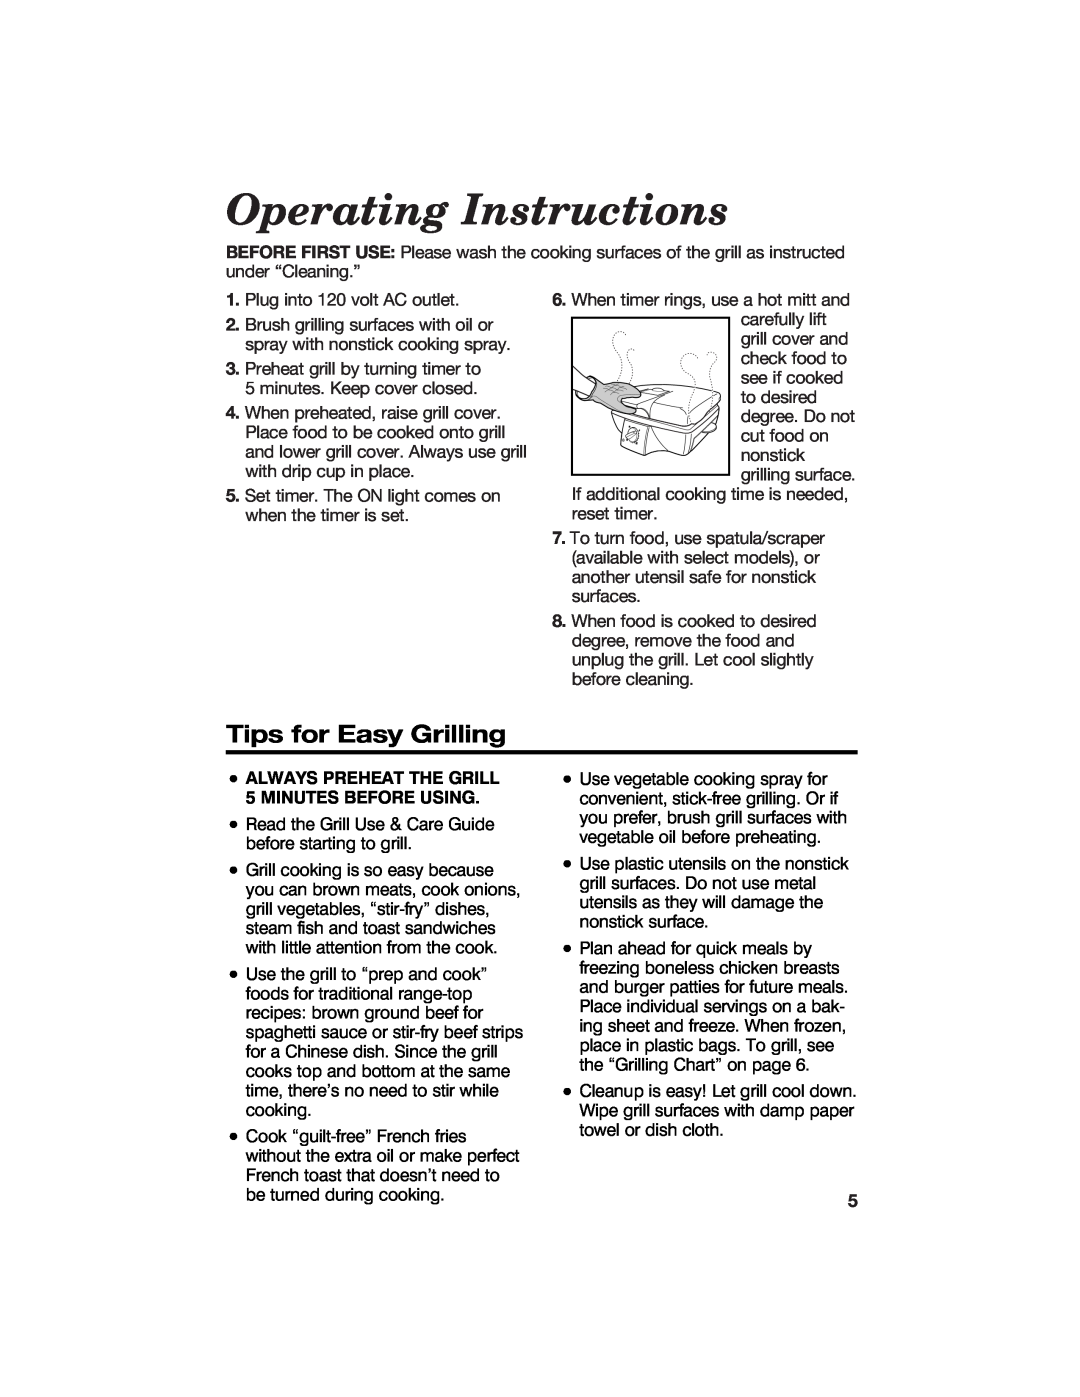 Hamilton Beach 840135600 Operating Instructions, Tips for Easy Grilling, ALWAYS PREHEAT THE GRILL 5 MINUTES BEFORE USING 